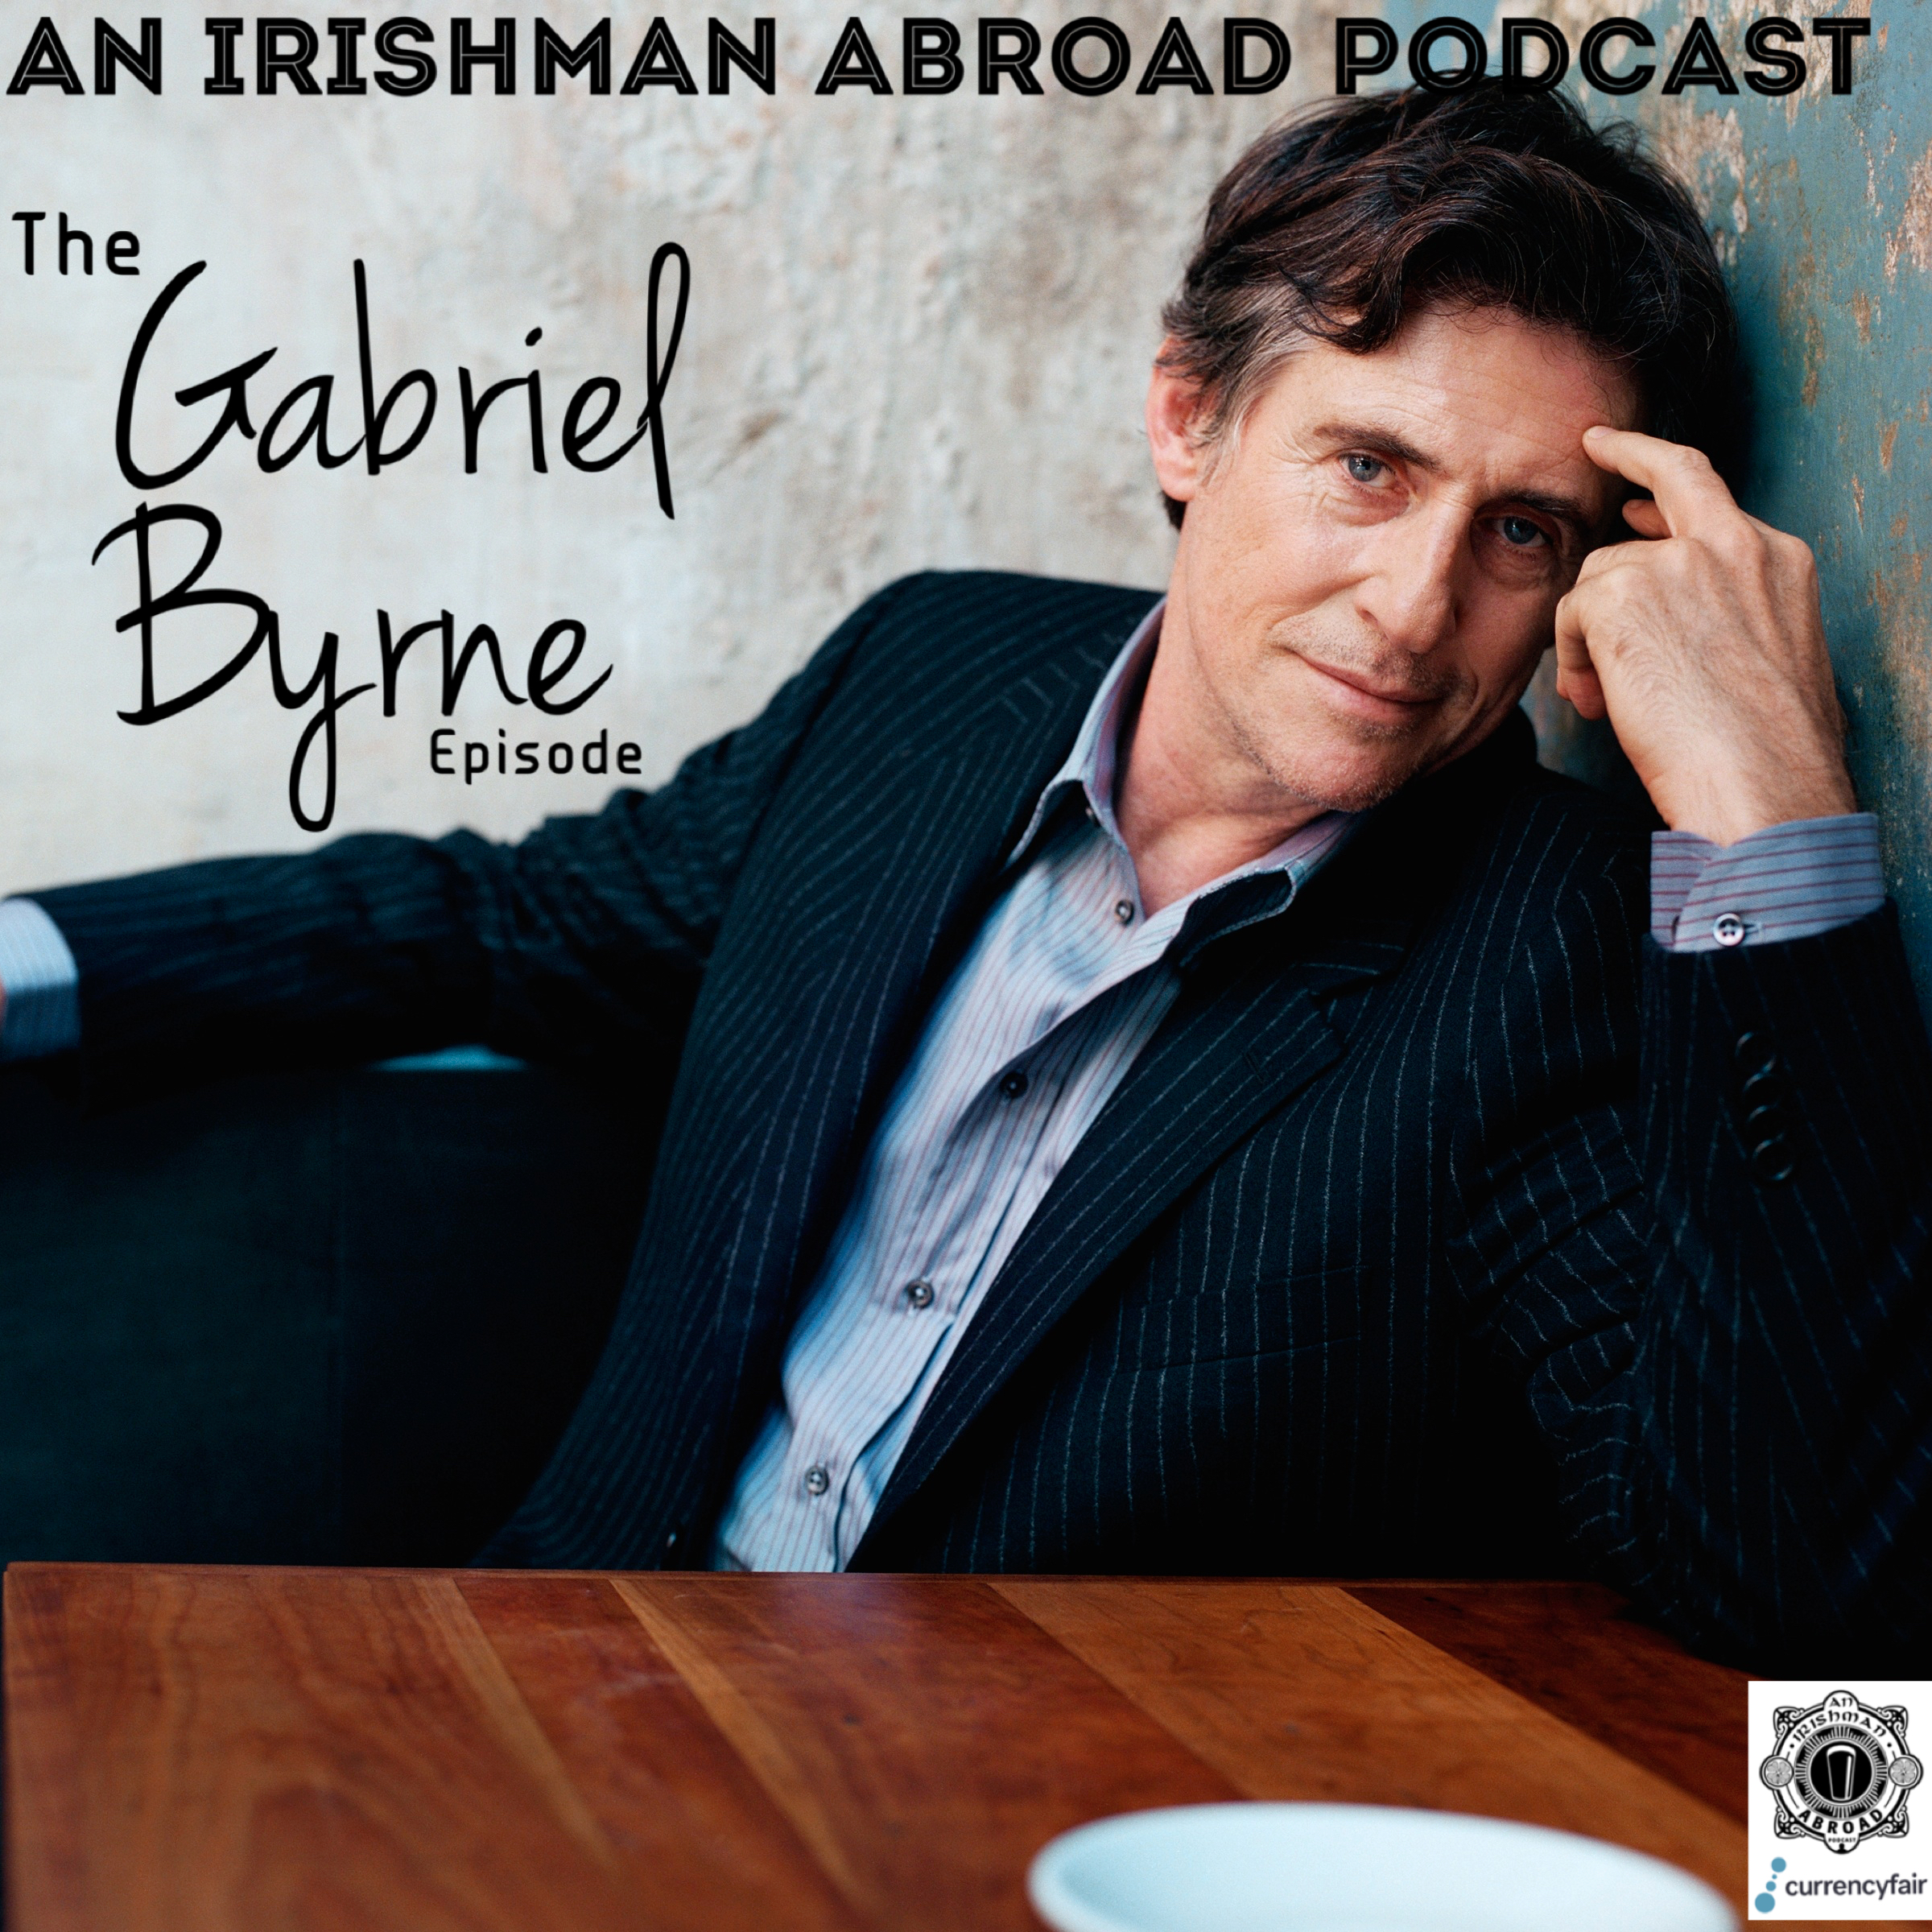 Gabriel Byrne lit the podcast up with his honesty. You'd be a fool not to listen to it.